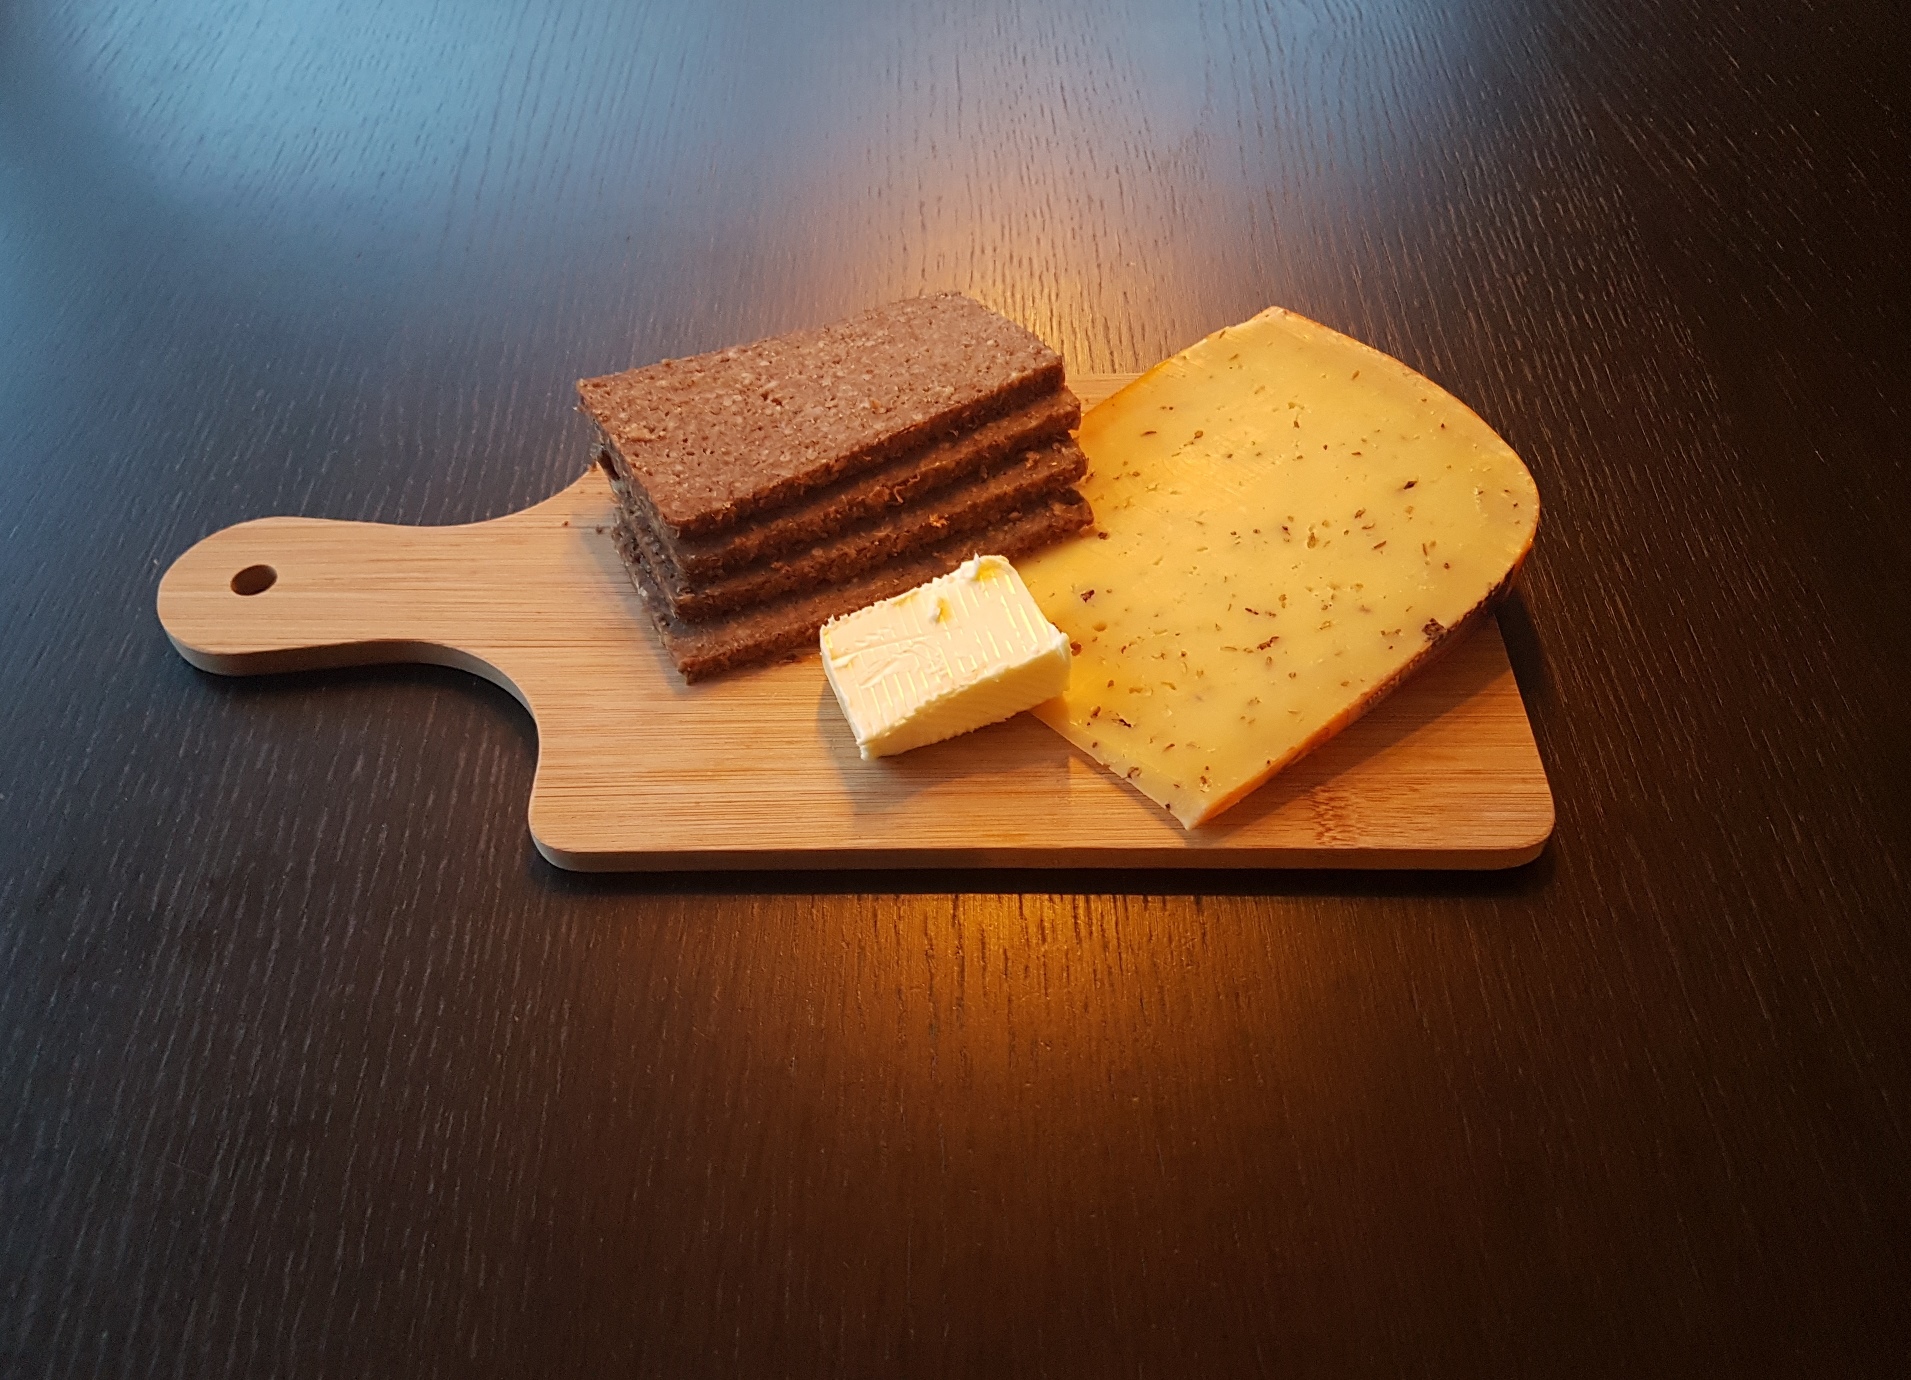 butter, Frisian rye bread and Frisian Clove Cheese on a wooden board